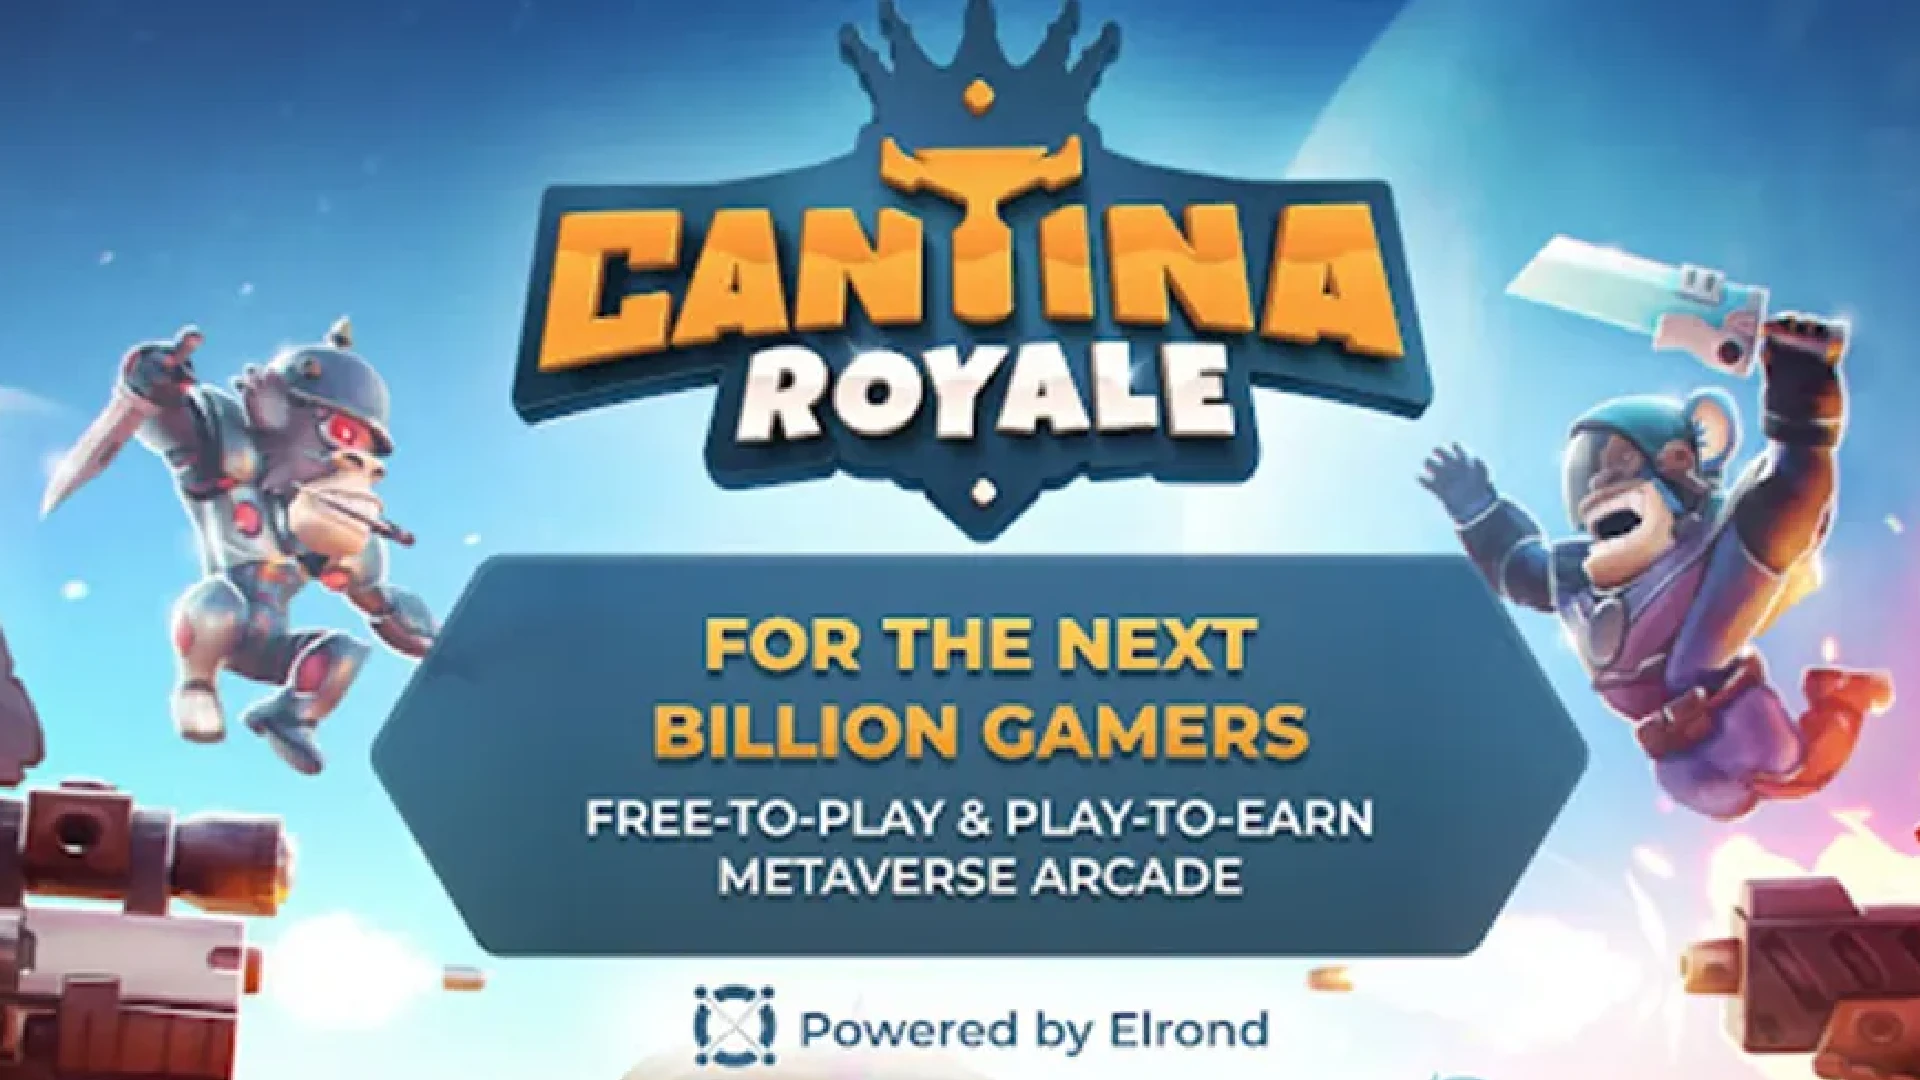 Cantina Royale Targets Next Billion Gamers With New Elrond-Based Free-To-Play & Play-To-Earn Metaverse Arcade